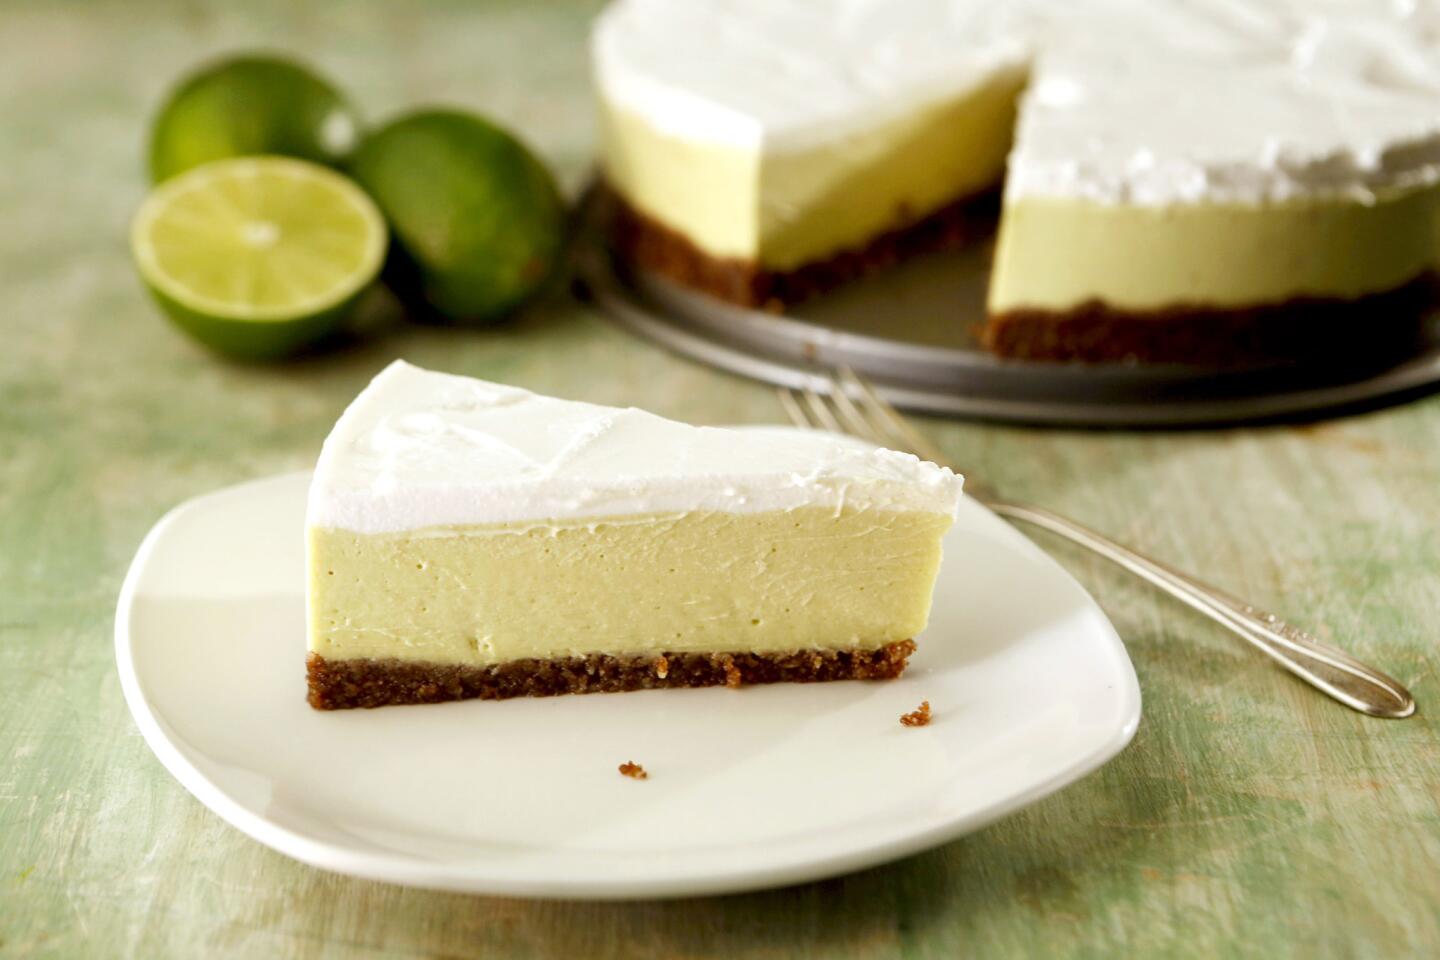 Taste some of the best key lime pies in the area at this annual festival. Some events are free to watch, others have an entrance fee in order to participate. Various locations throughout Key West. www.keylimefestival.com